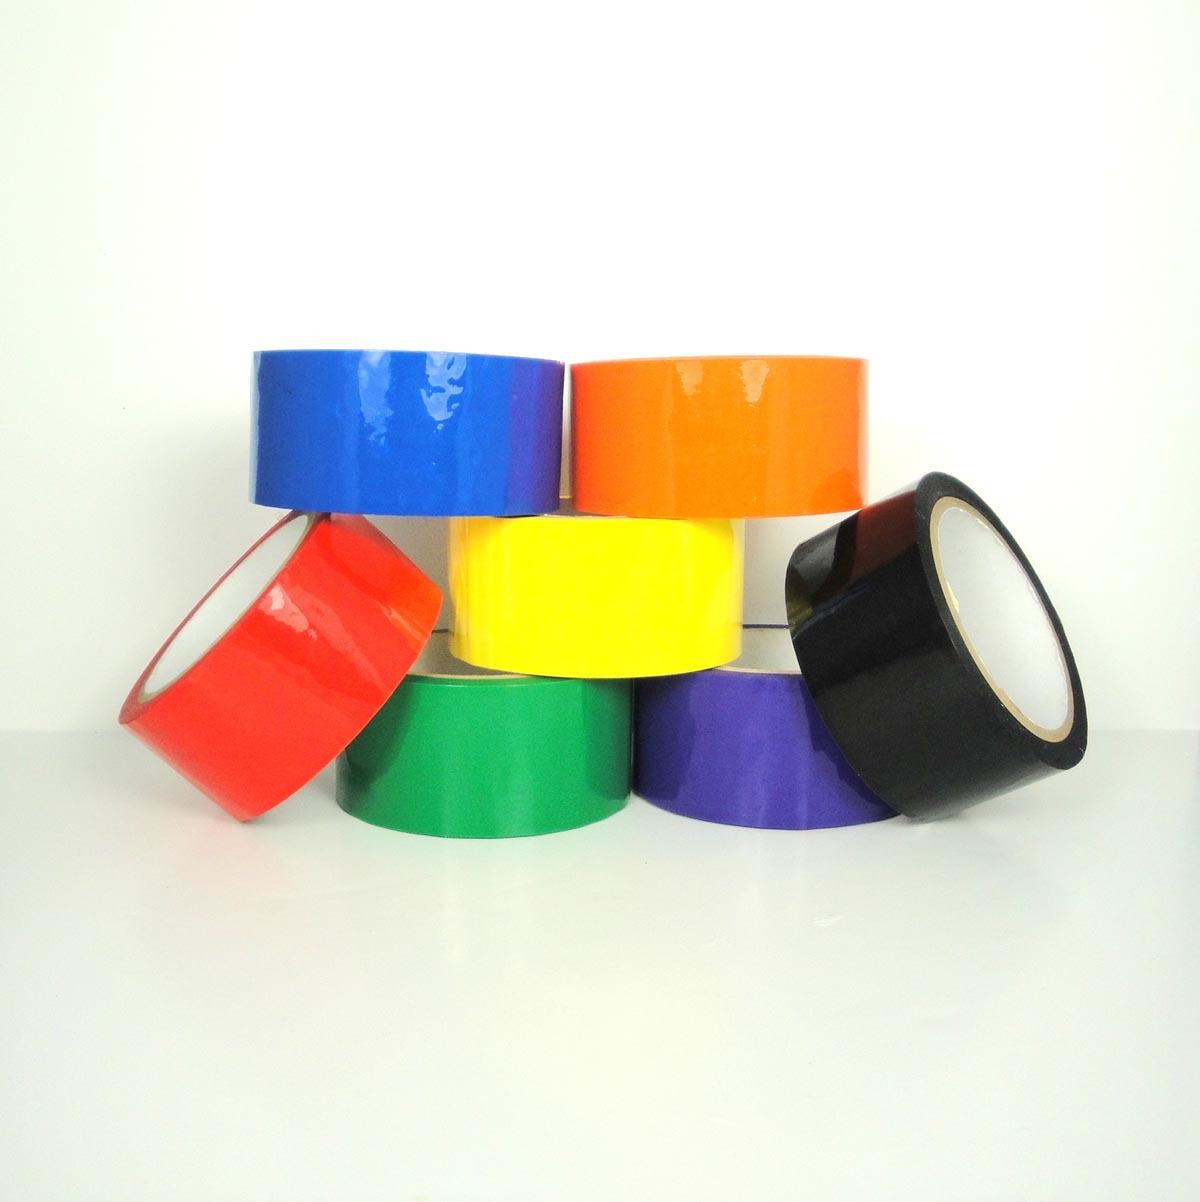 7 Sealing color Tape Rolls 2 x 110 Yards Packaging BLUE - Light weight